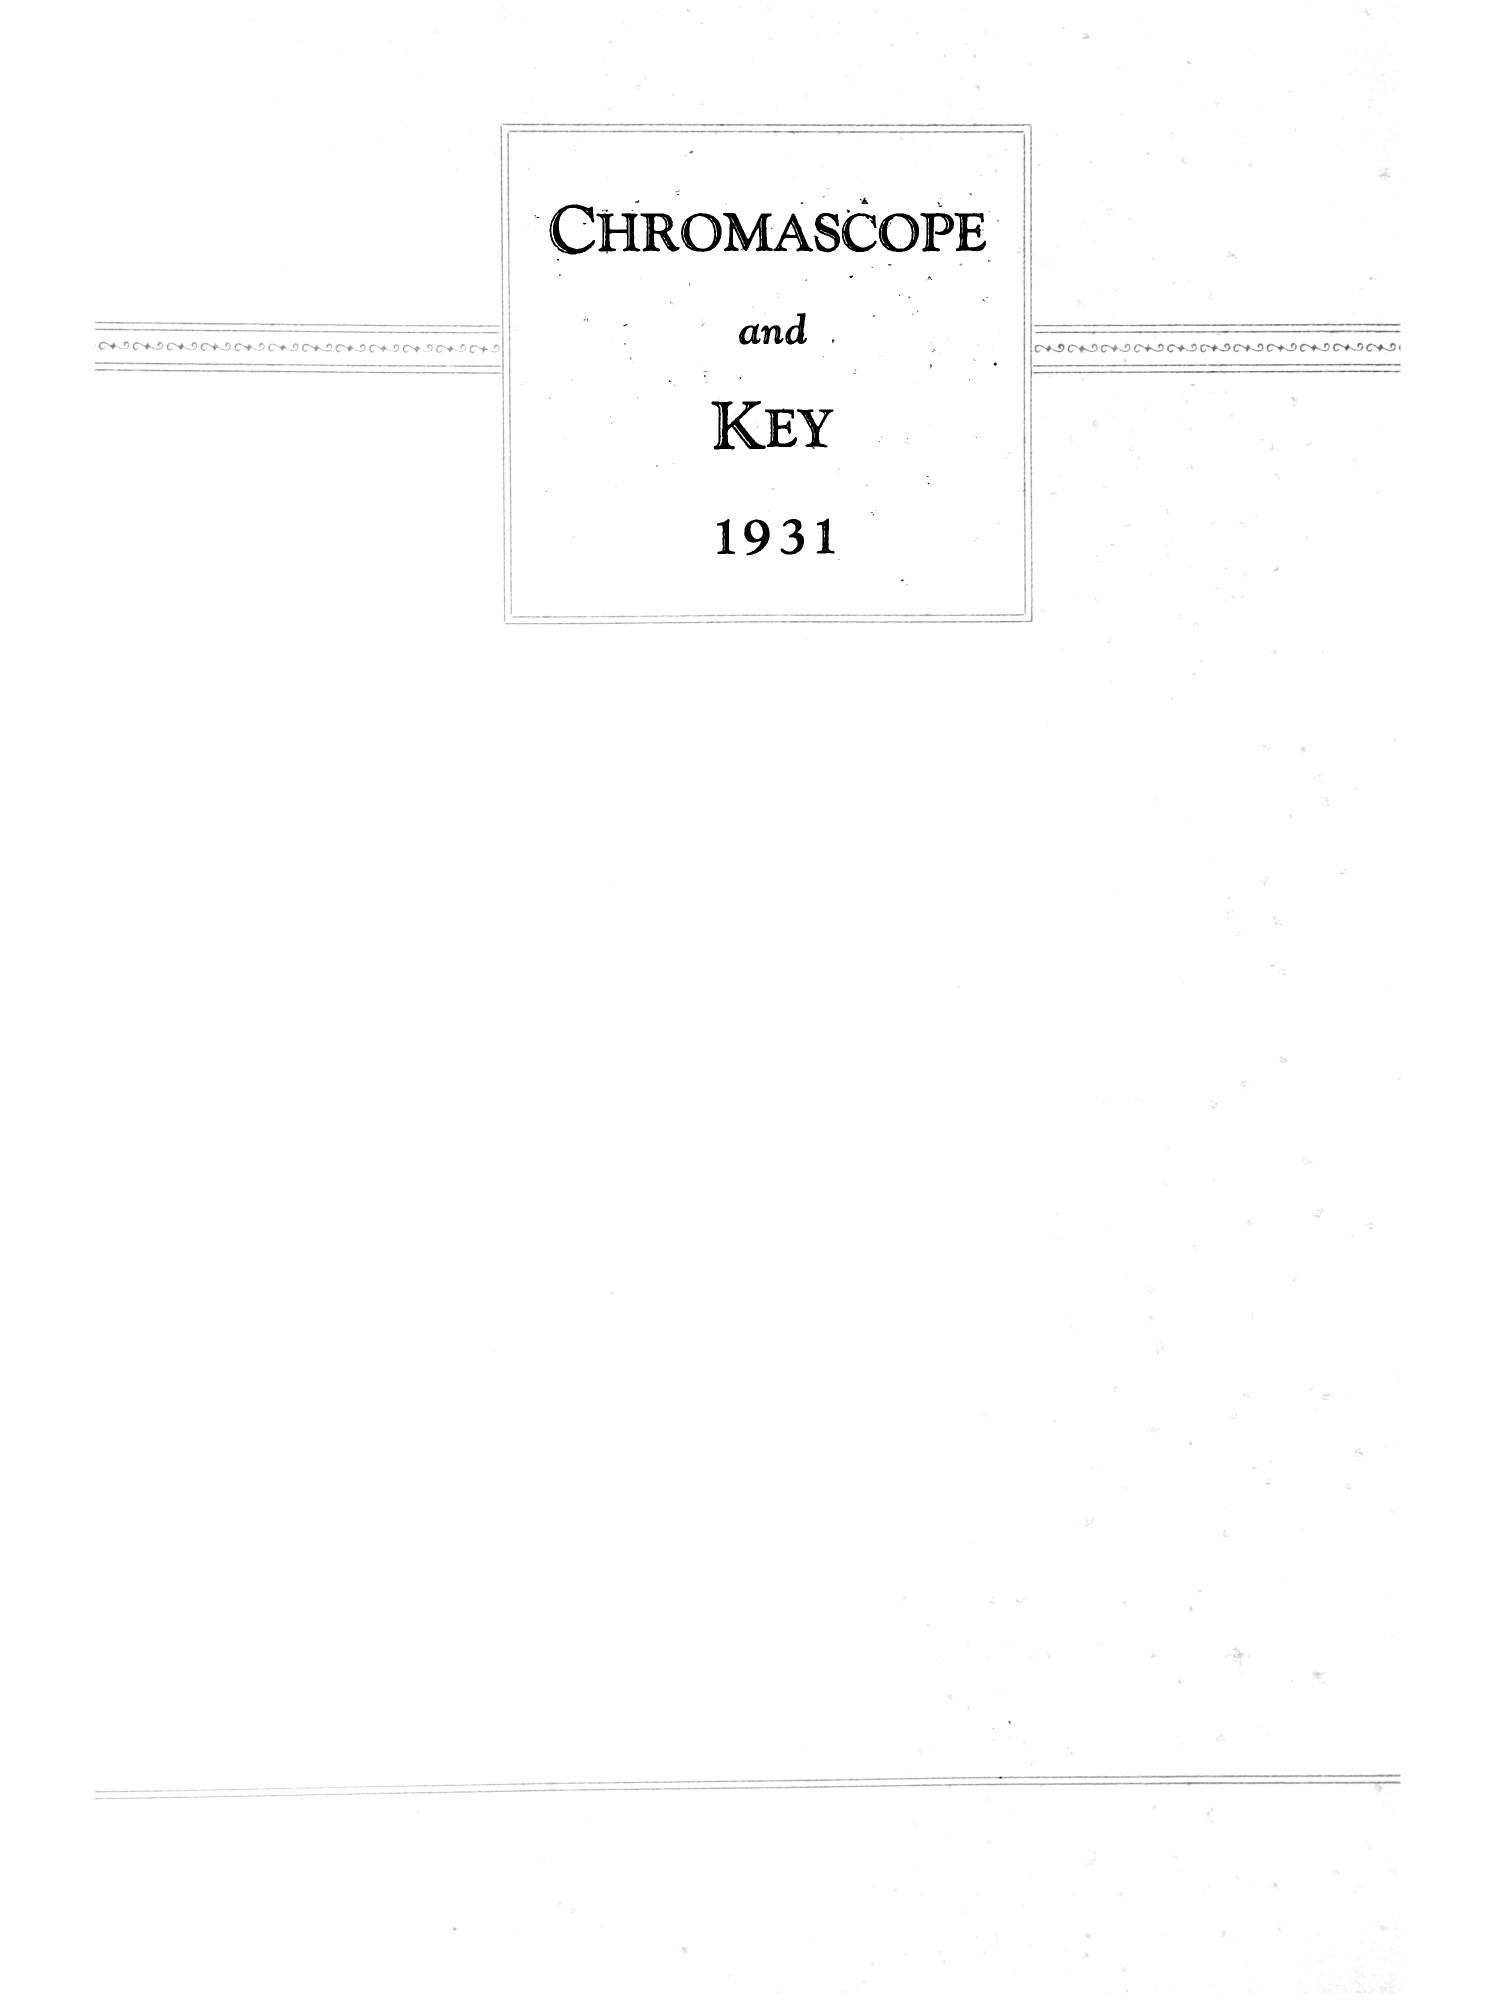 The Chromascope and Key, Volume 31, 1931
                                                
                                                    [Sequence #]: 2 of 227
                                                